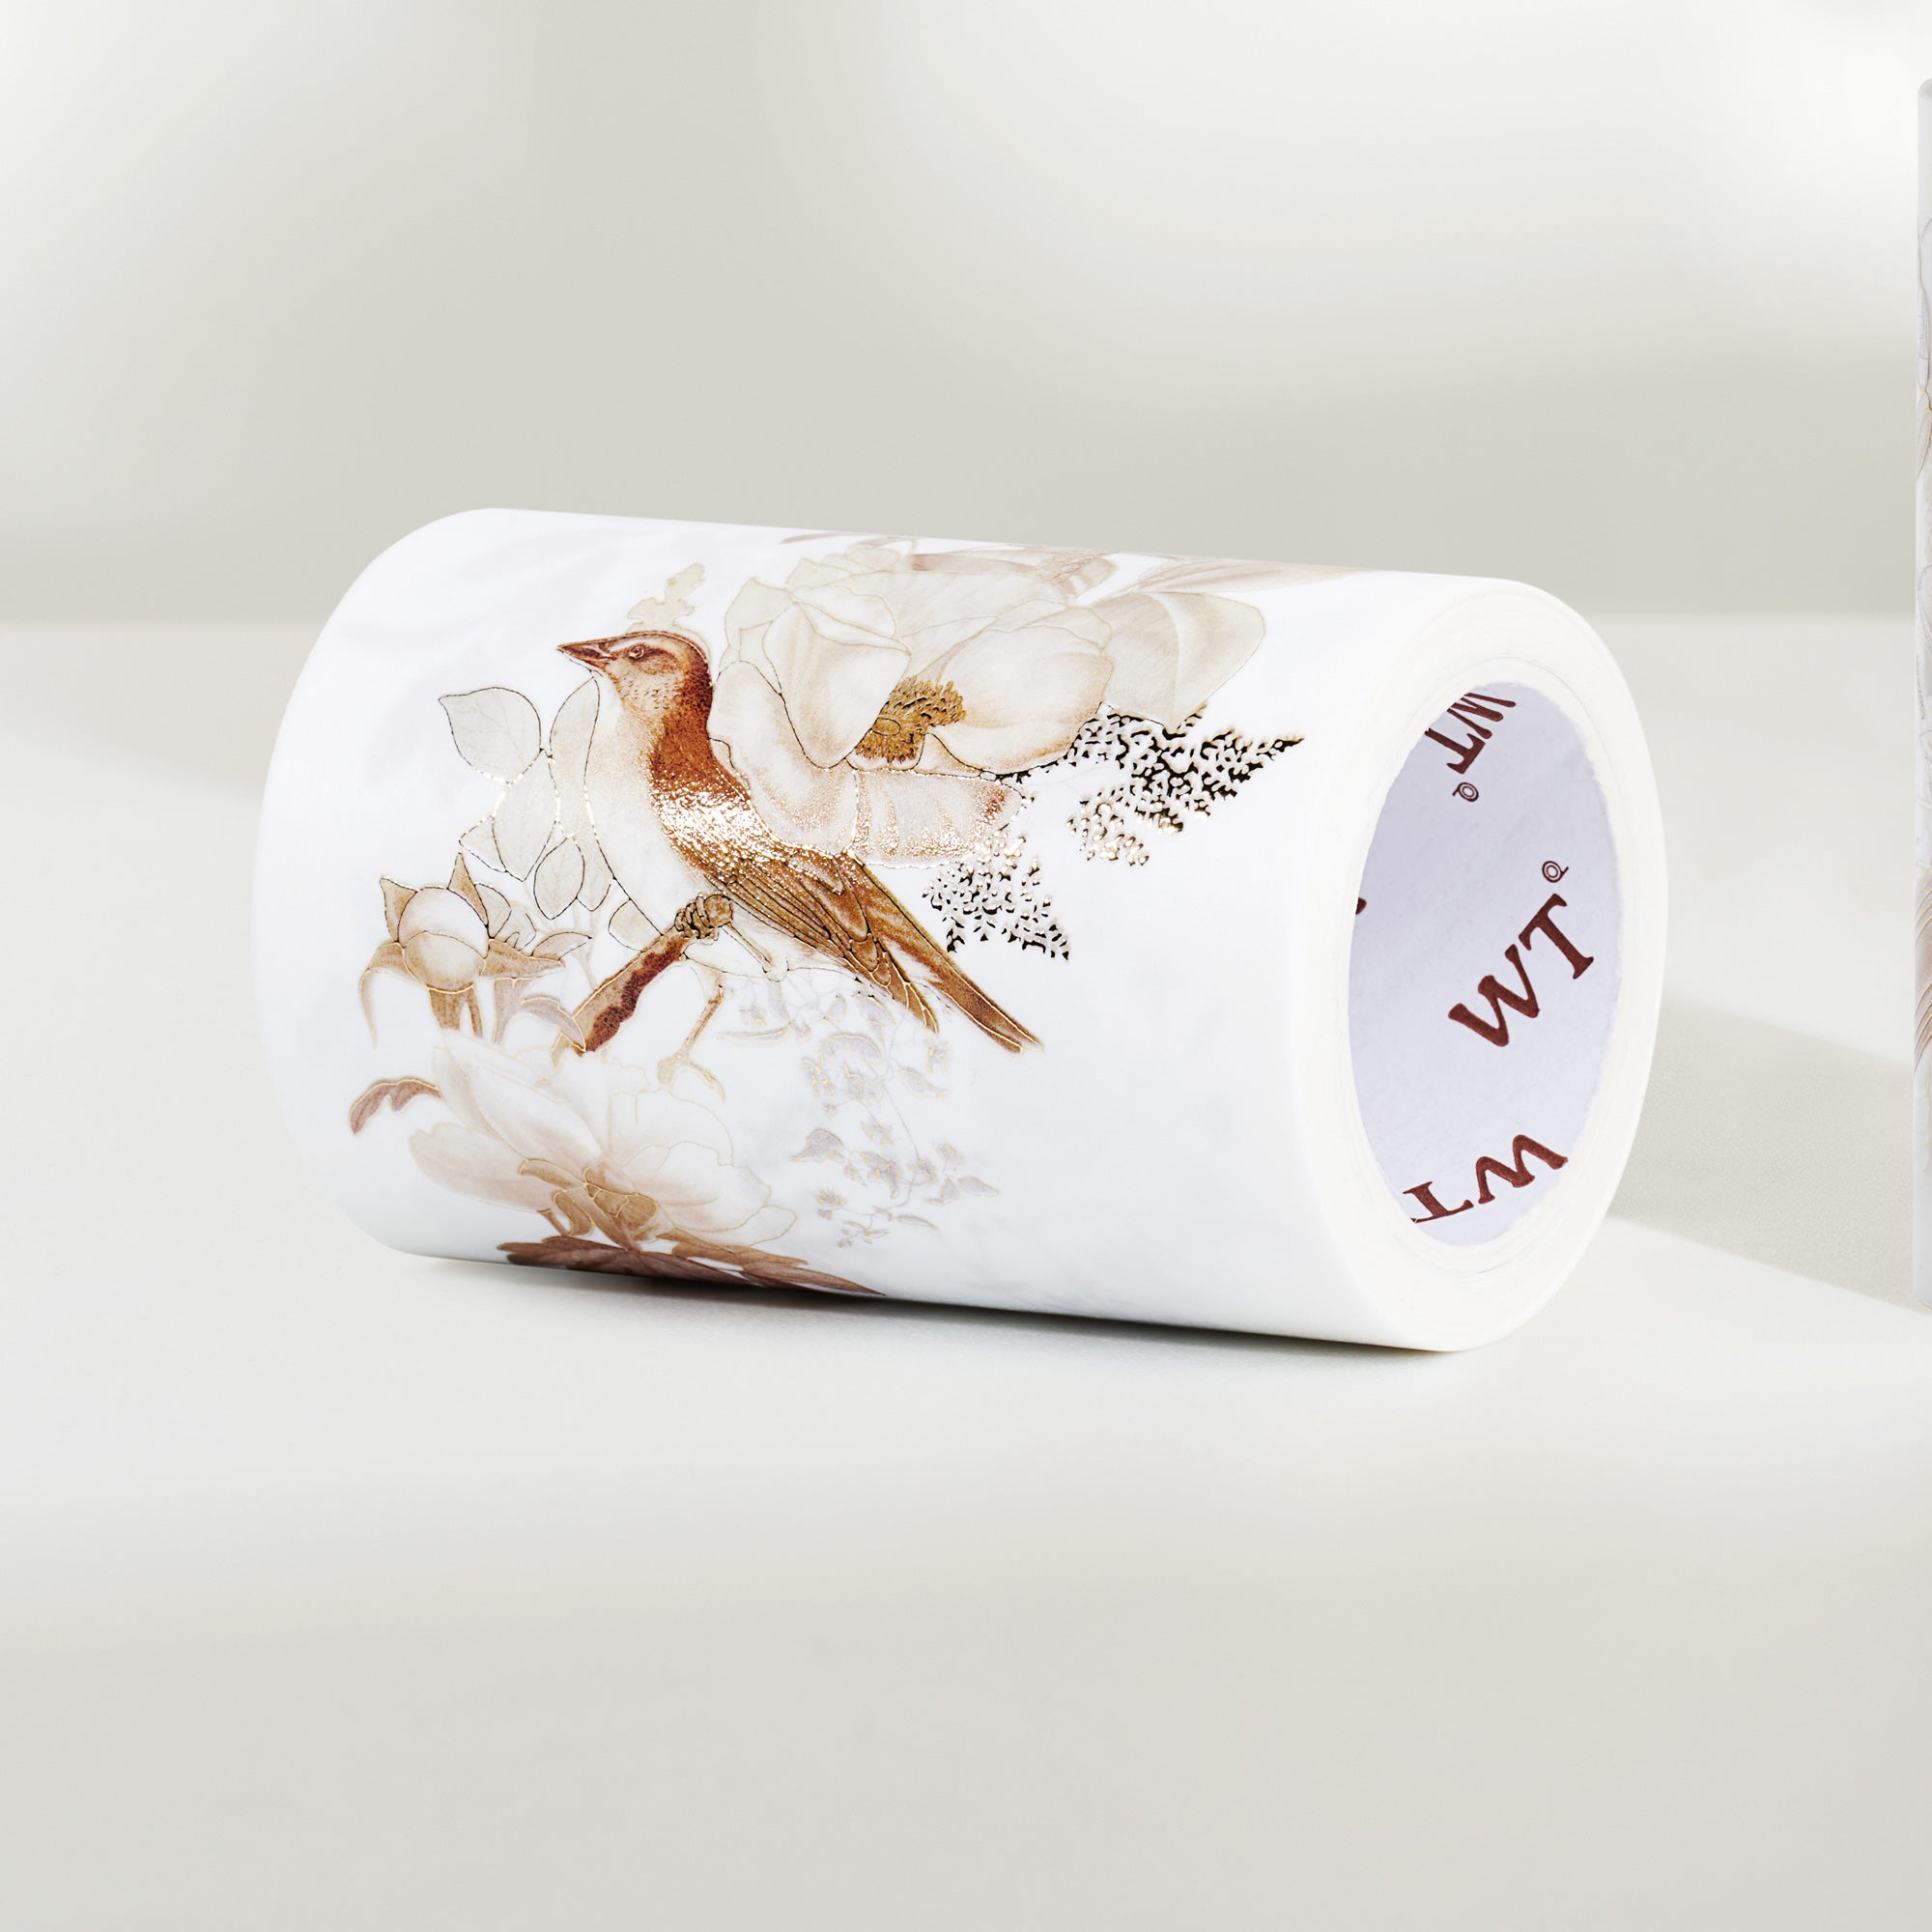  Florentia Wide Washi / PET Tape (GILDED) by The Washi Tape Shop The Washi Tape Shop Perfumarie